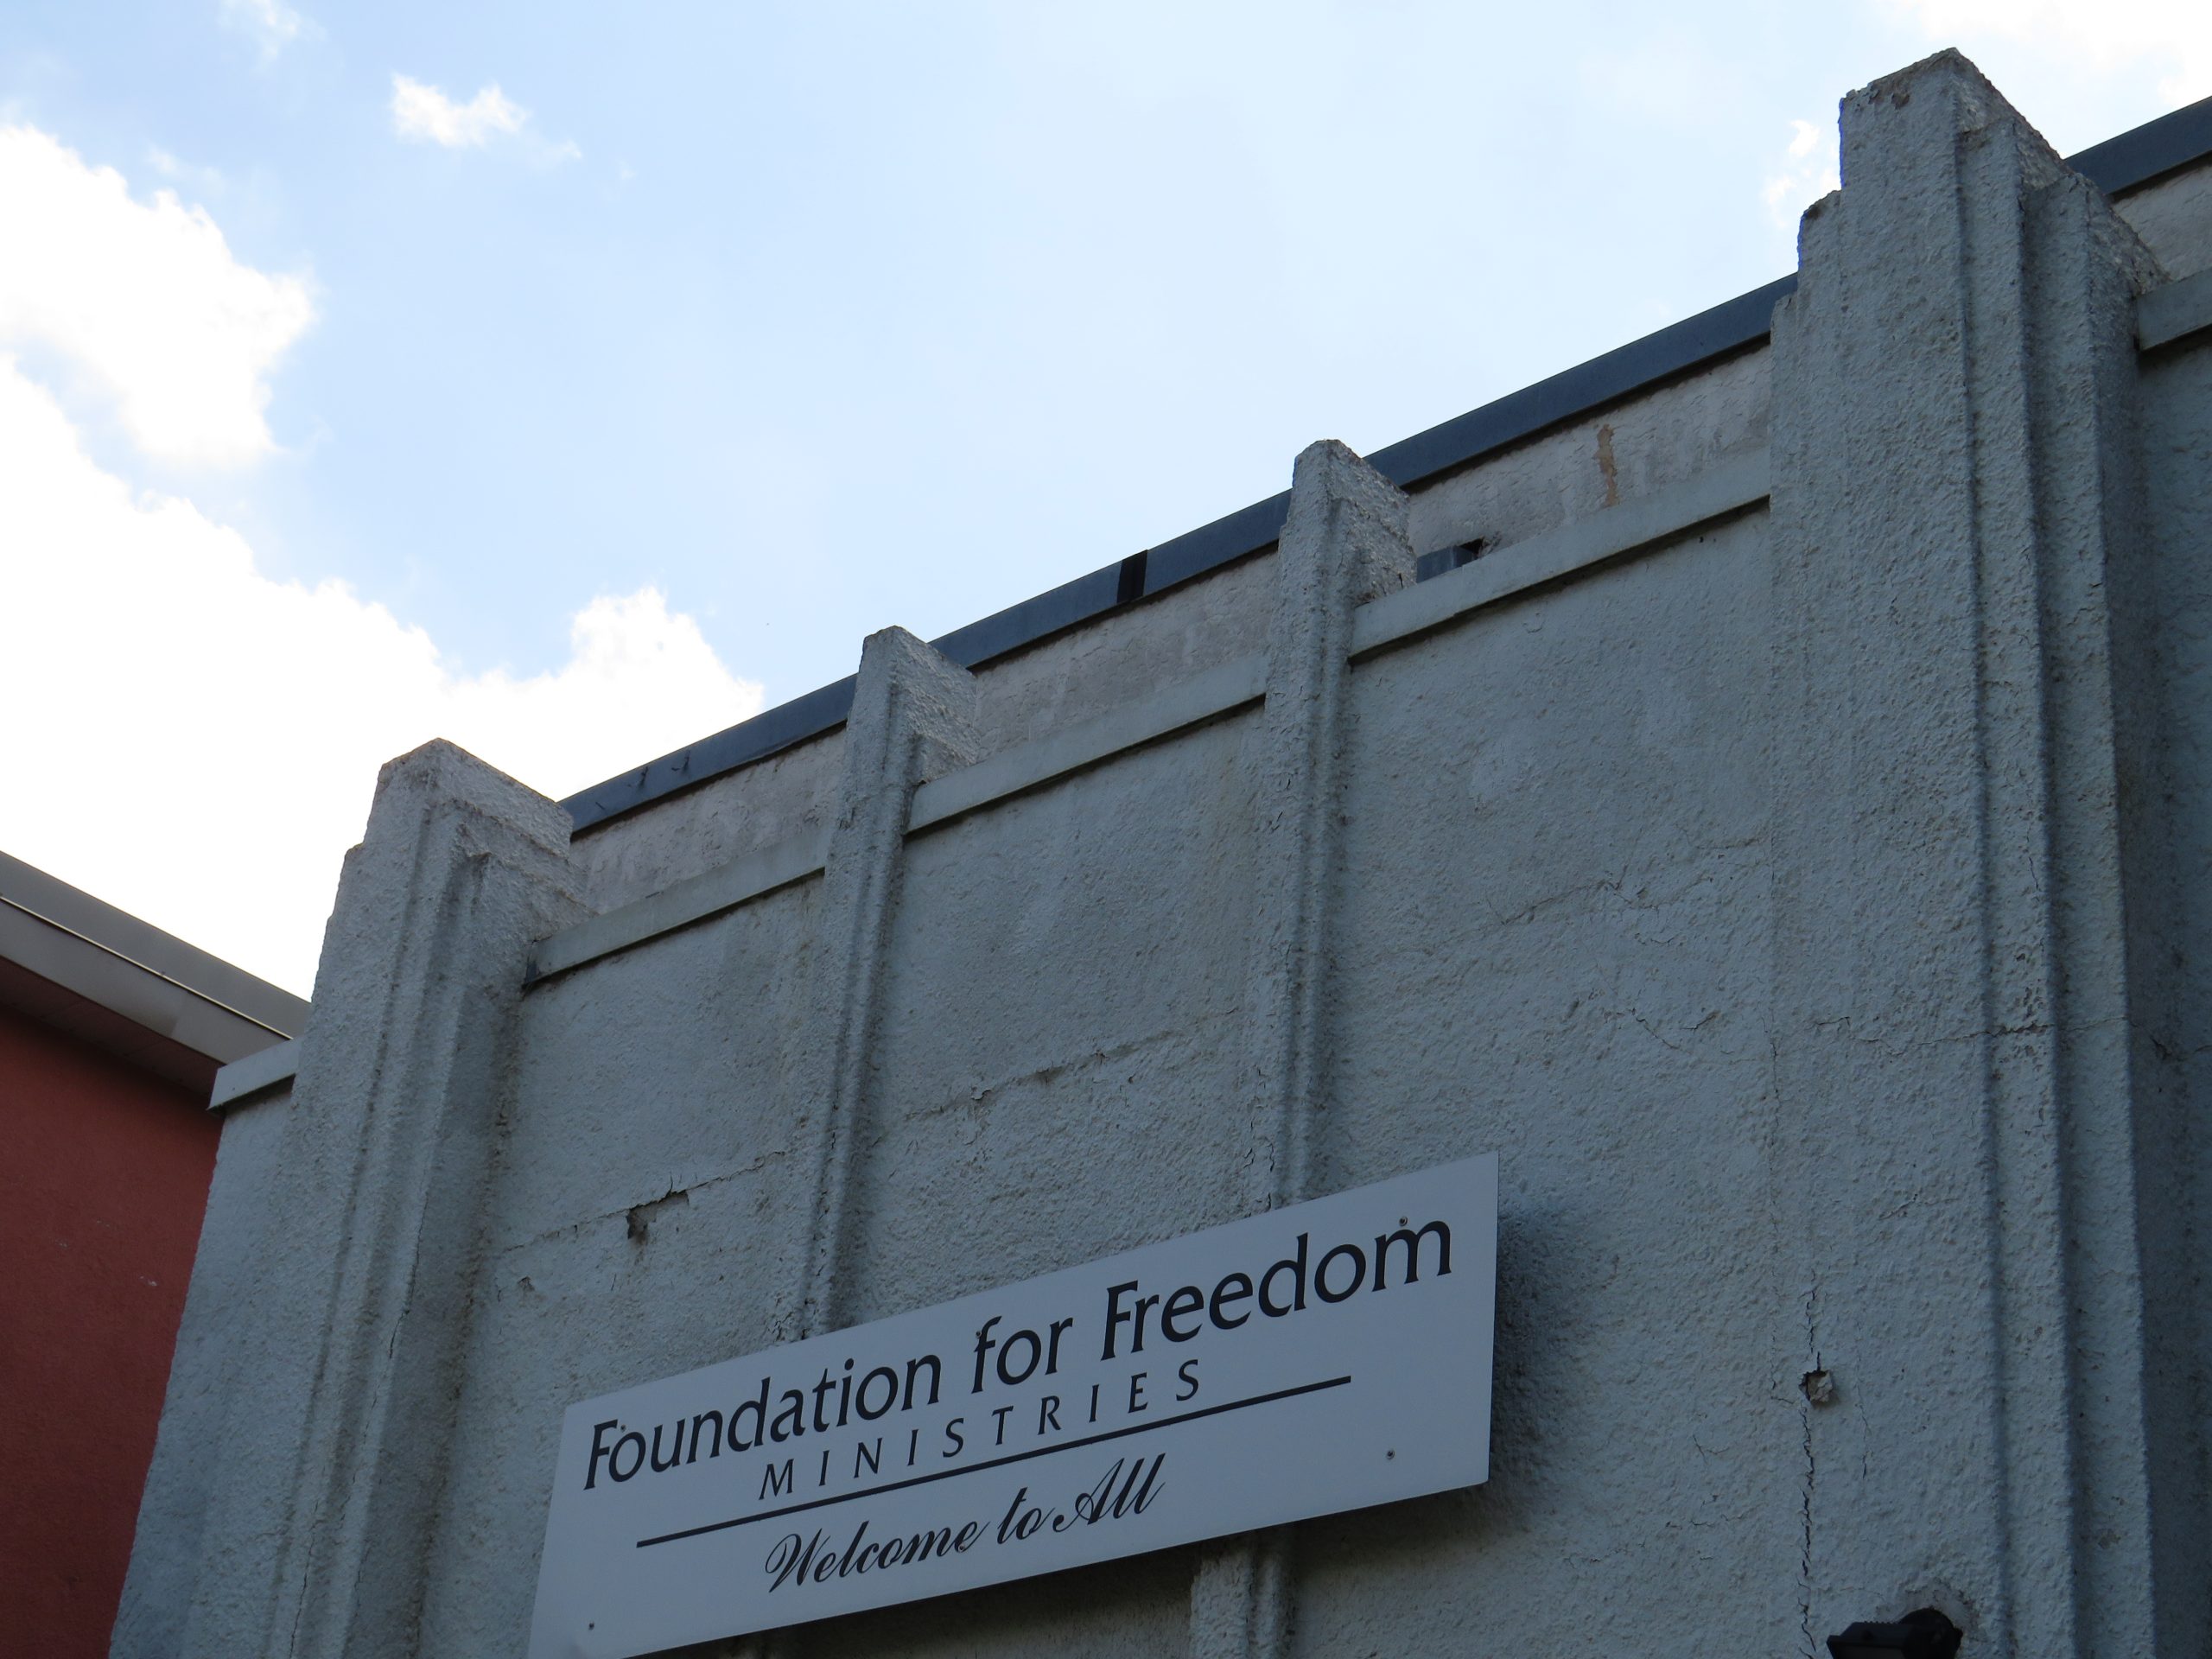 A closeup of the exterior of 242 Manitoba Ave. The building is light grey stucco with no windows. There is a sign above the doors that says "Foundation for Freedom Ministries - Welcome to All".